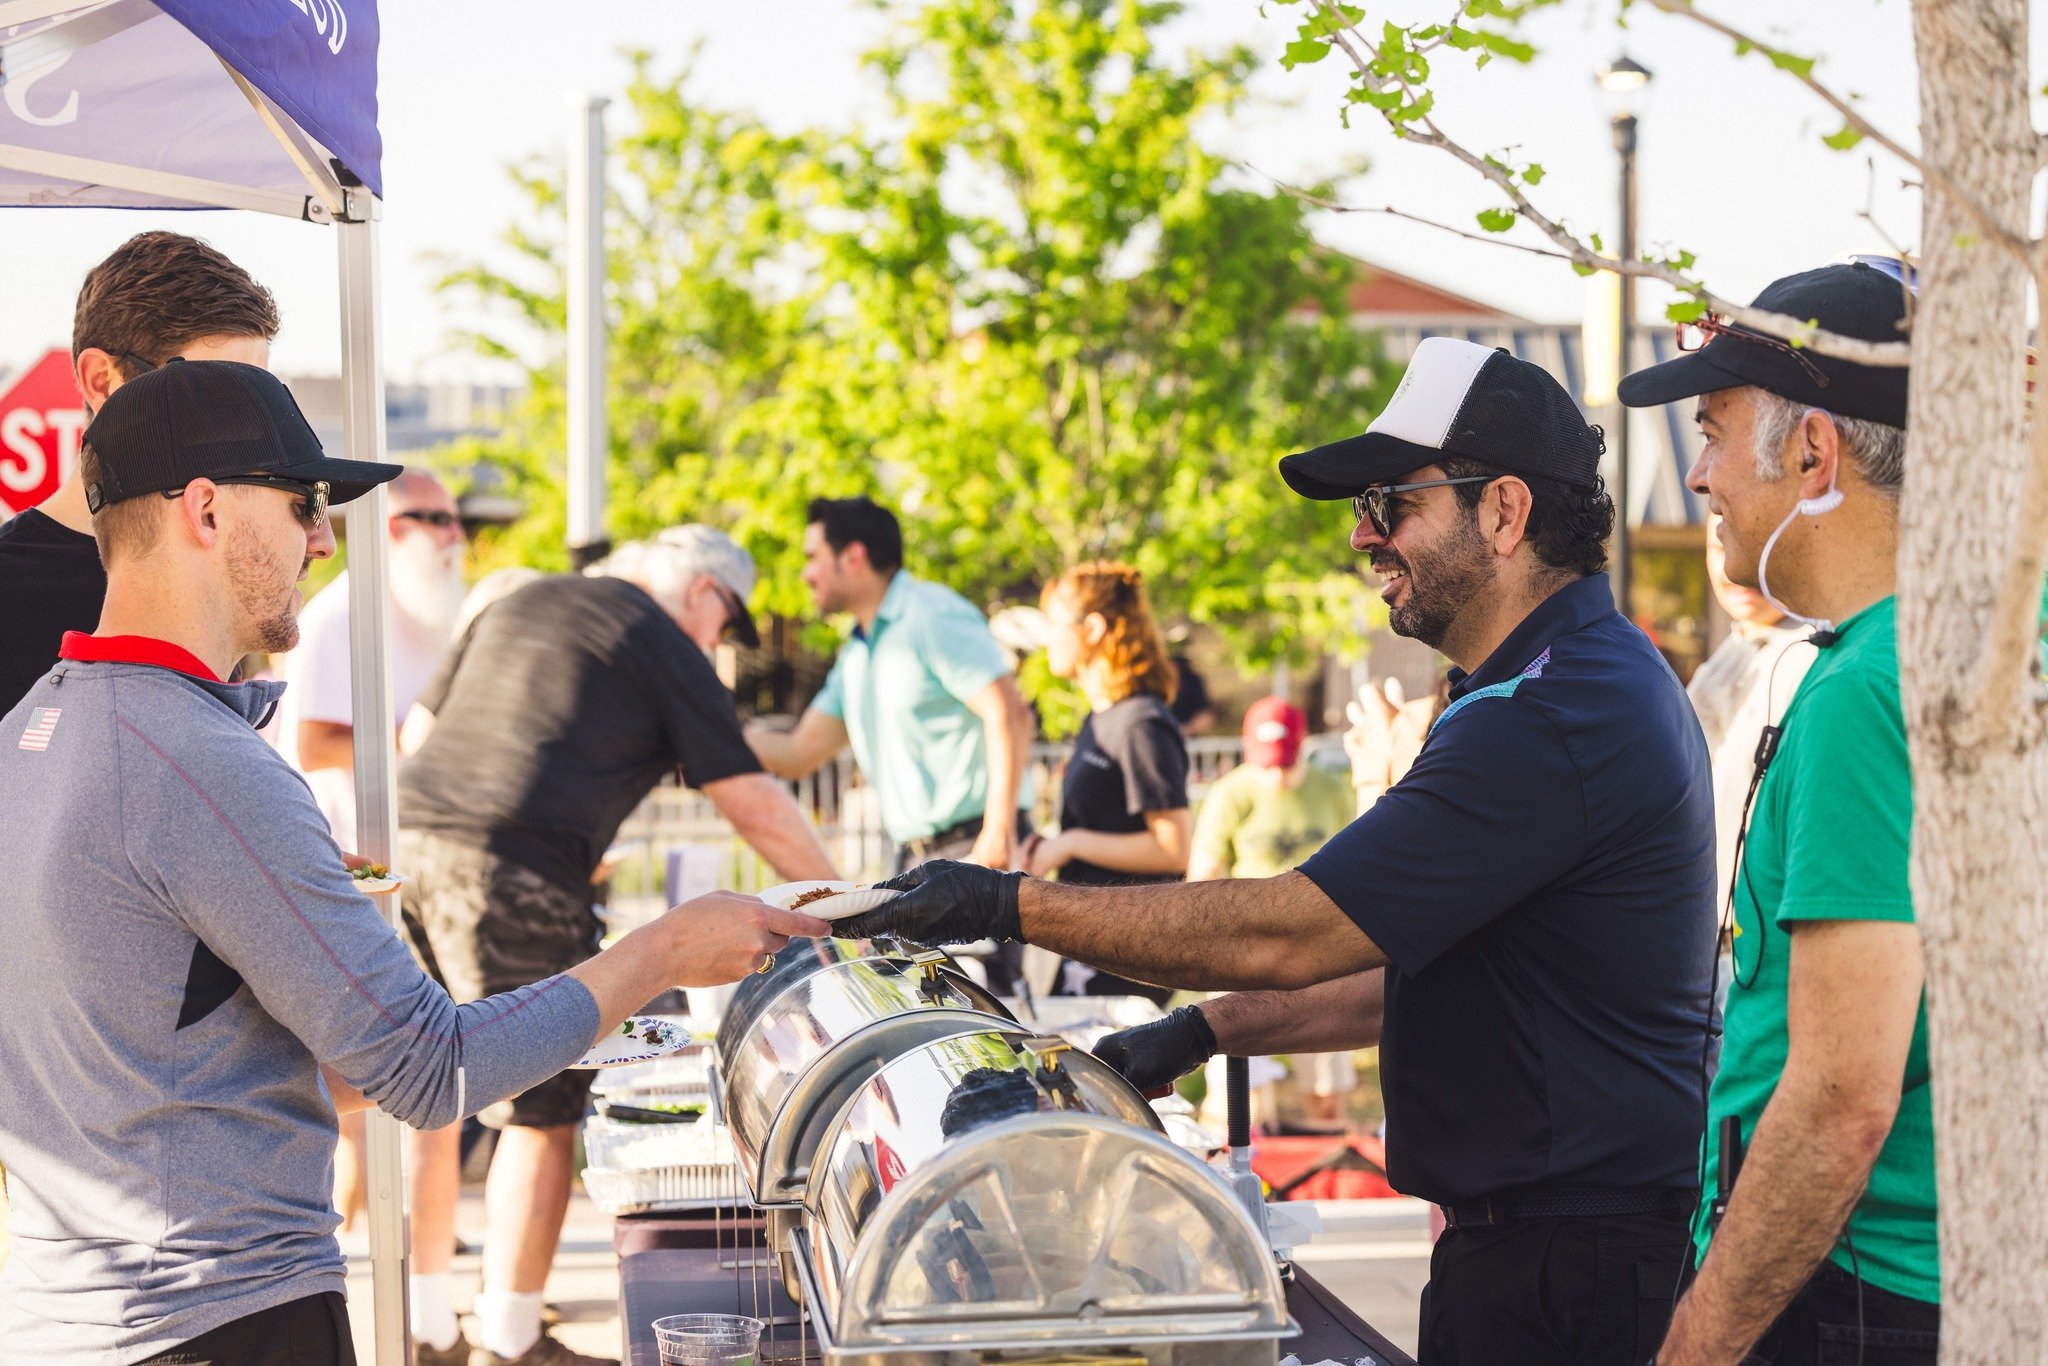 Join us for Family Bike Night on May 15th, where Mr. Taco Loco, Casa Alejo, and Fridha's Mexican Kitchen and Mezcal are spicing things up with FREE tacos starting at 6:30pm! 🌮 Bring your little riders and enjoy a family bike ride, kids obstacle cour